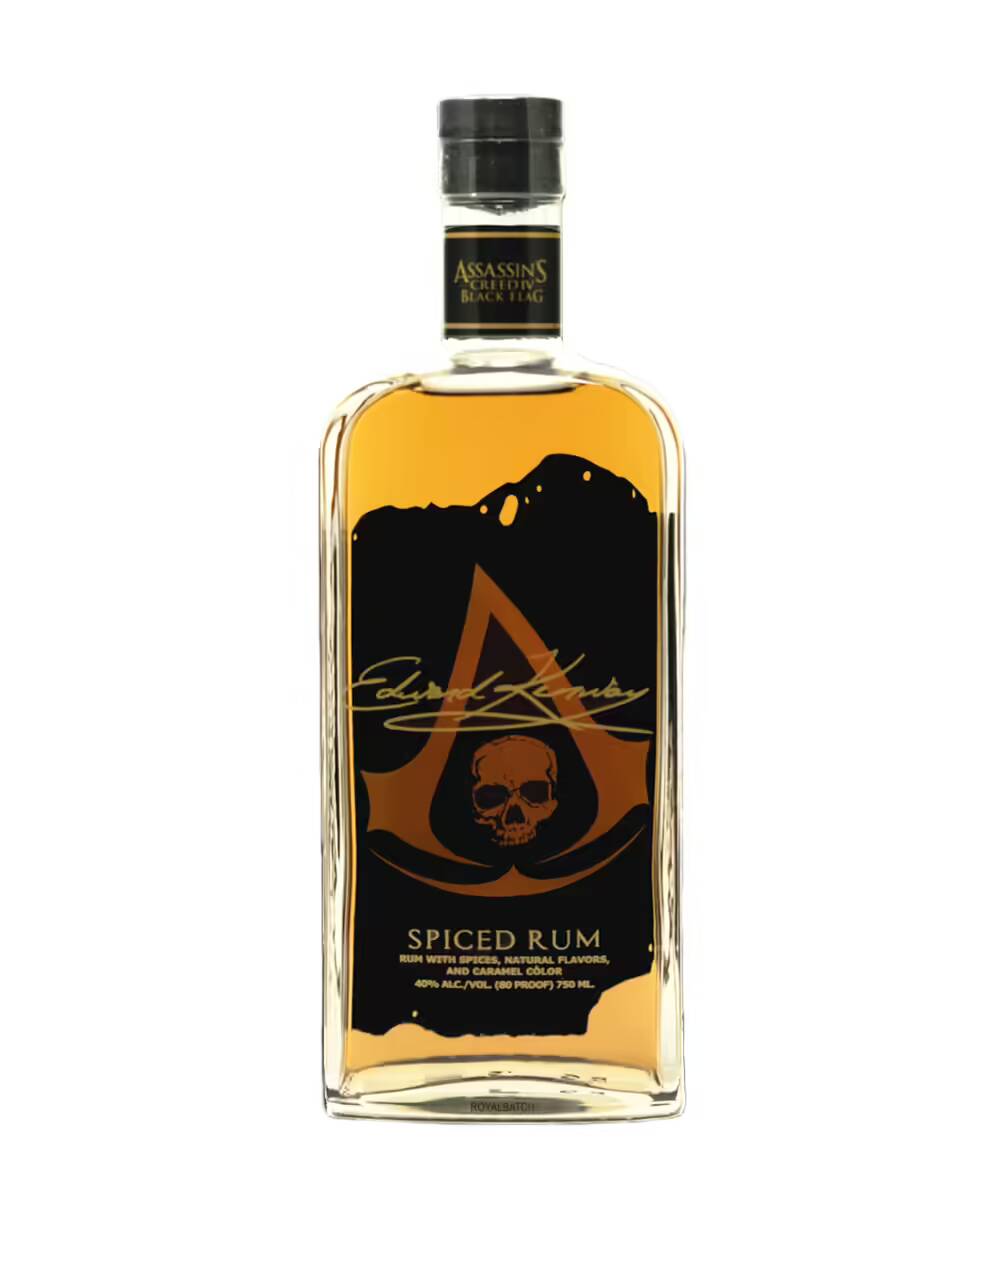 Assassin's Creed Black Flag Spiced Rum